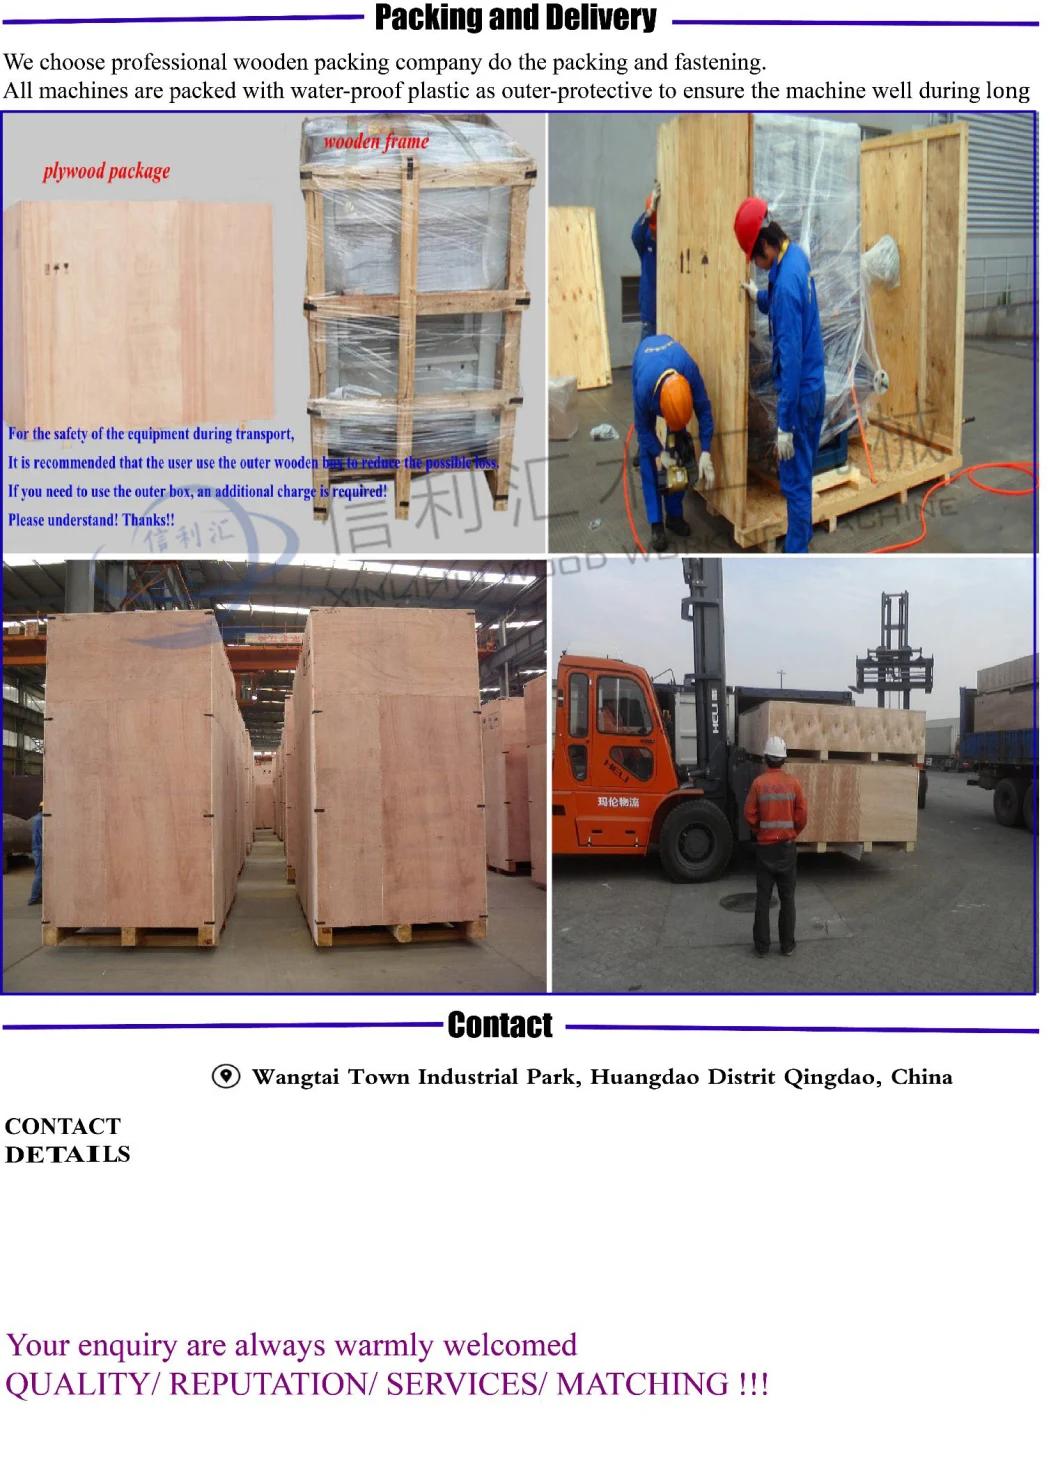 Timber Cut Saw Mjk61-38td Sliding Table Sawmill Machine Panel Saw 3200 Long with Spindle Molder Economical, 220 V 50/60